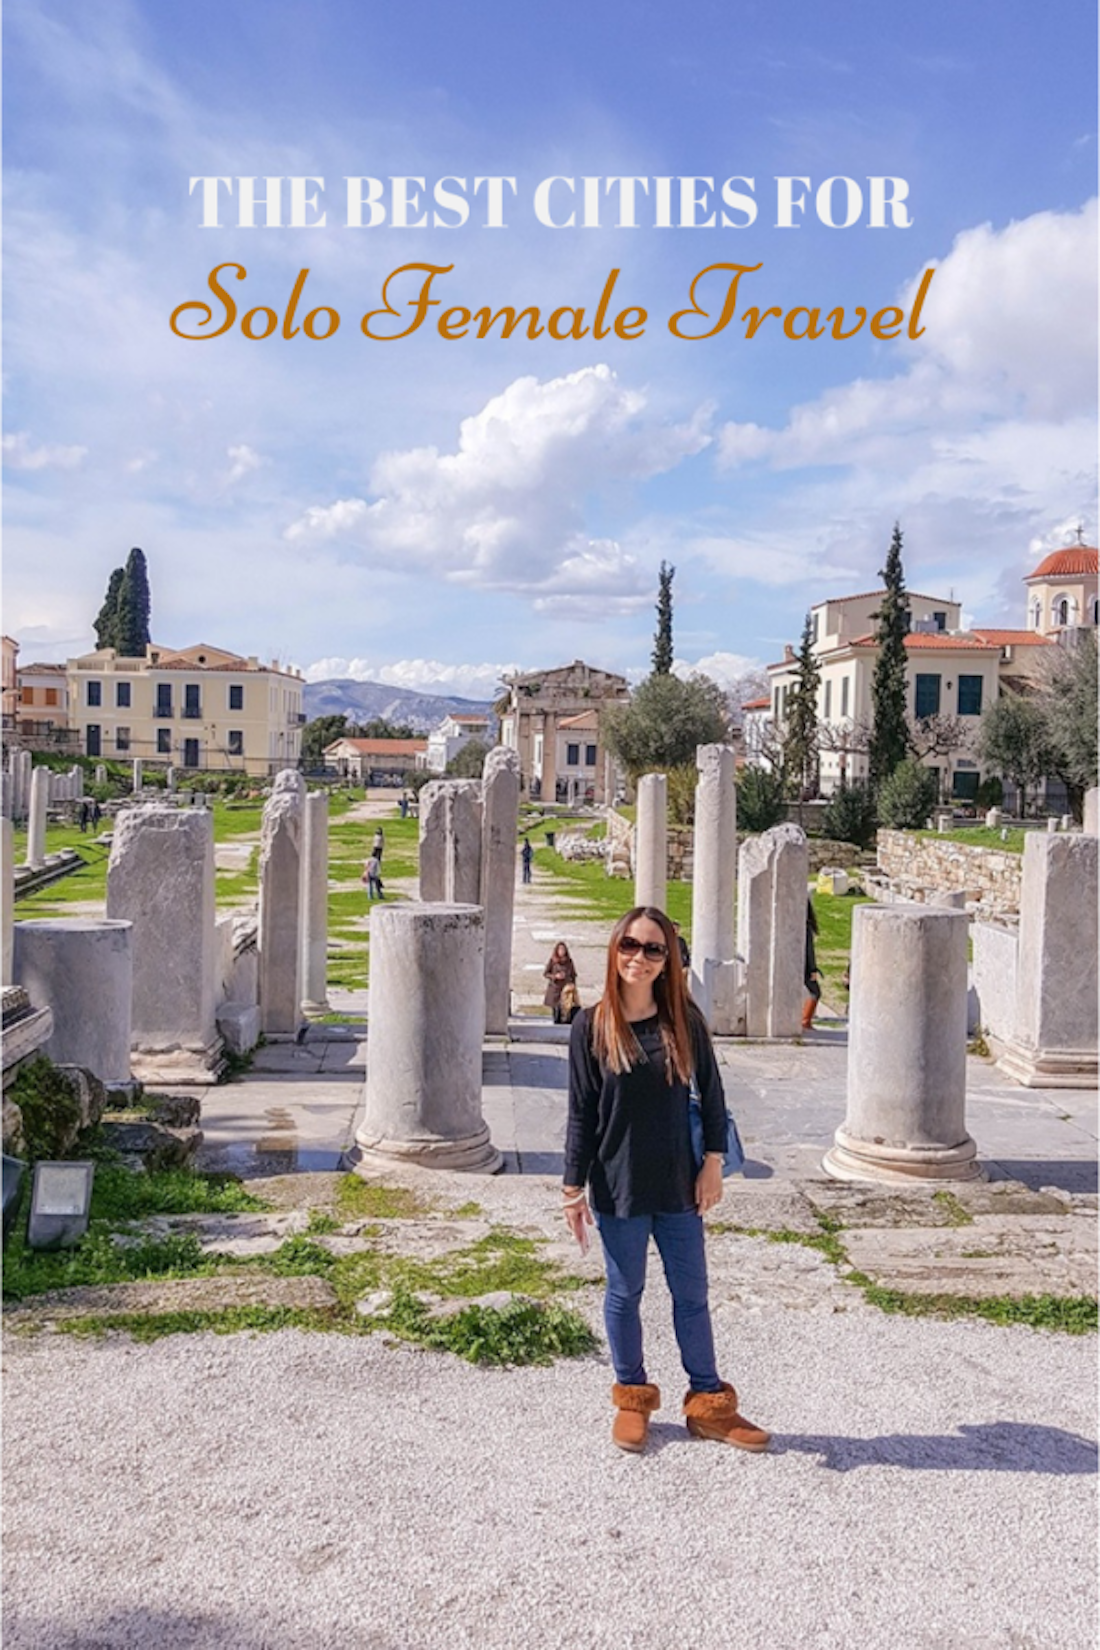 a9cd4-0200b-the-best-cities-for-solo-female-travel-cover